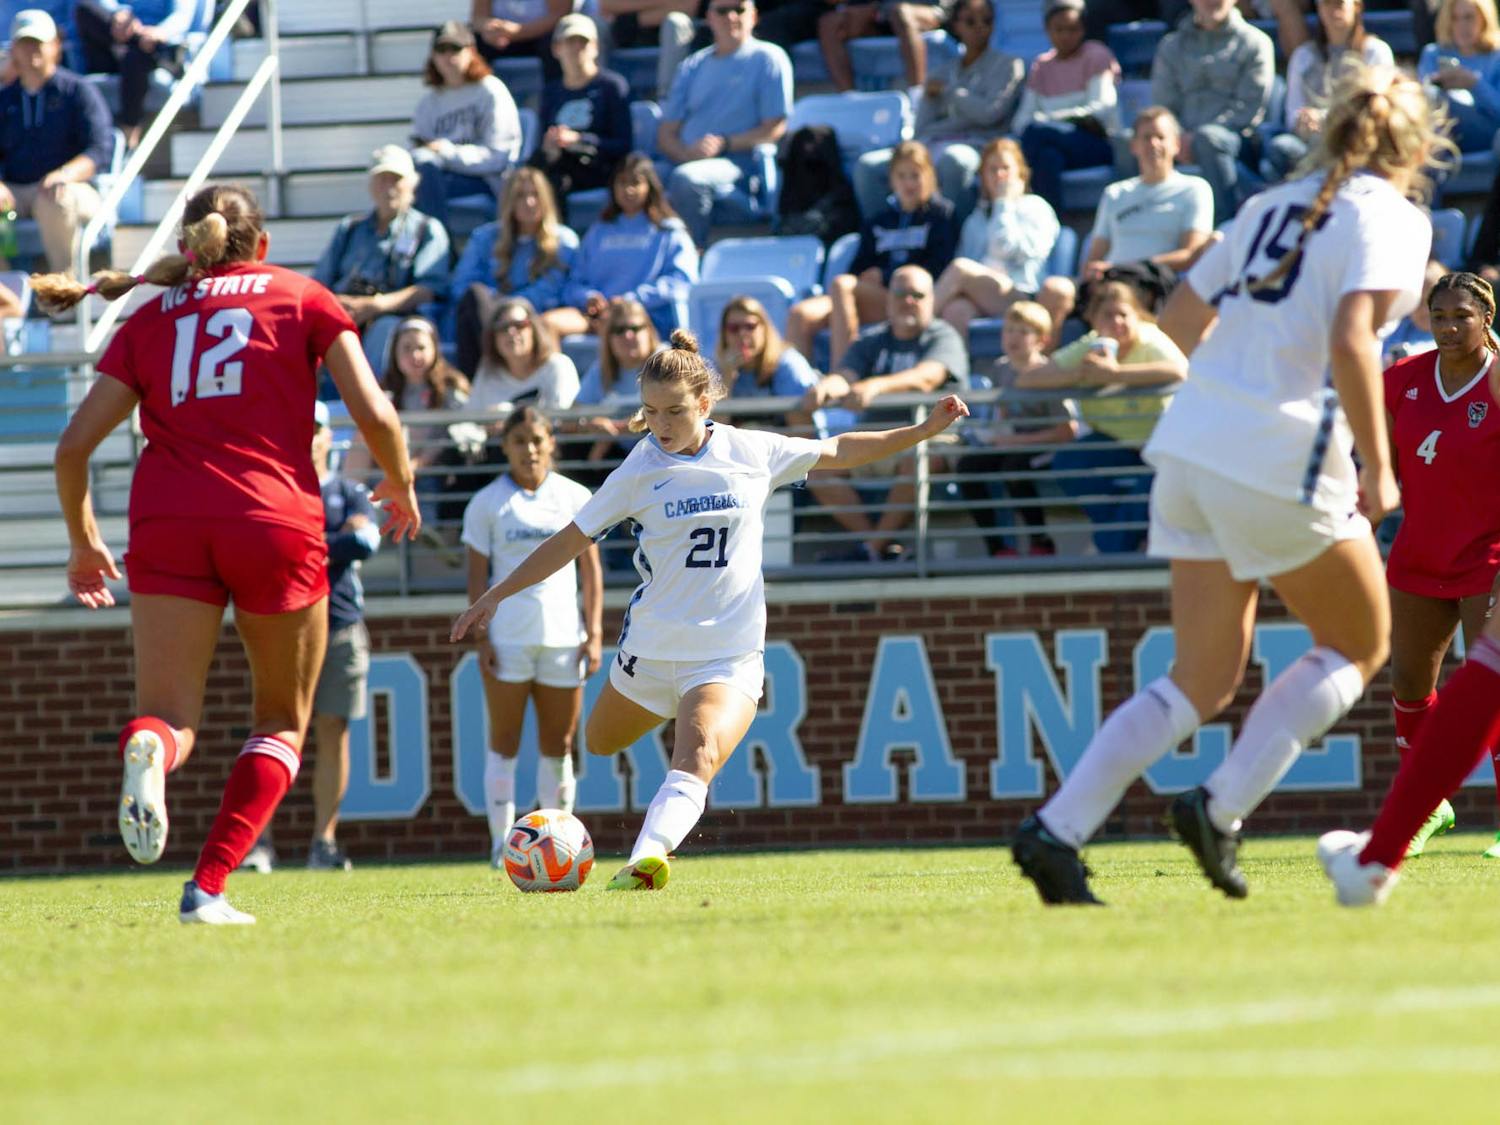 UNC freshman forward Ally Sentnor (21) takes a shot during the women's soccer game against NC State on Sunday, Oct. 9, 2022, at Dorrance Field. UNC beat NC State 2-0.